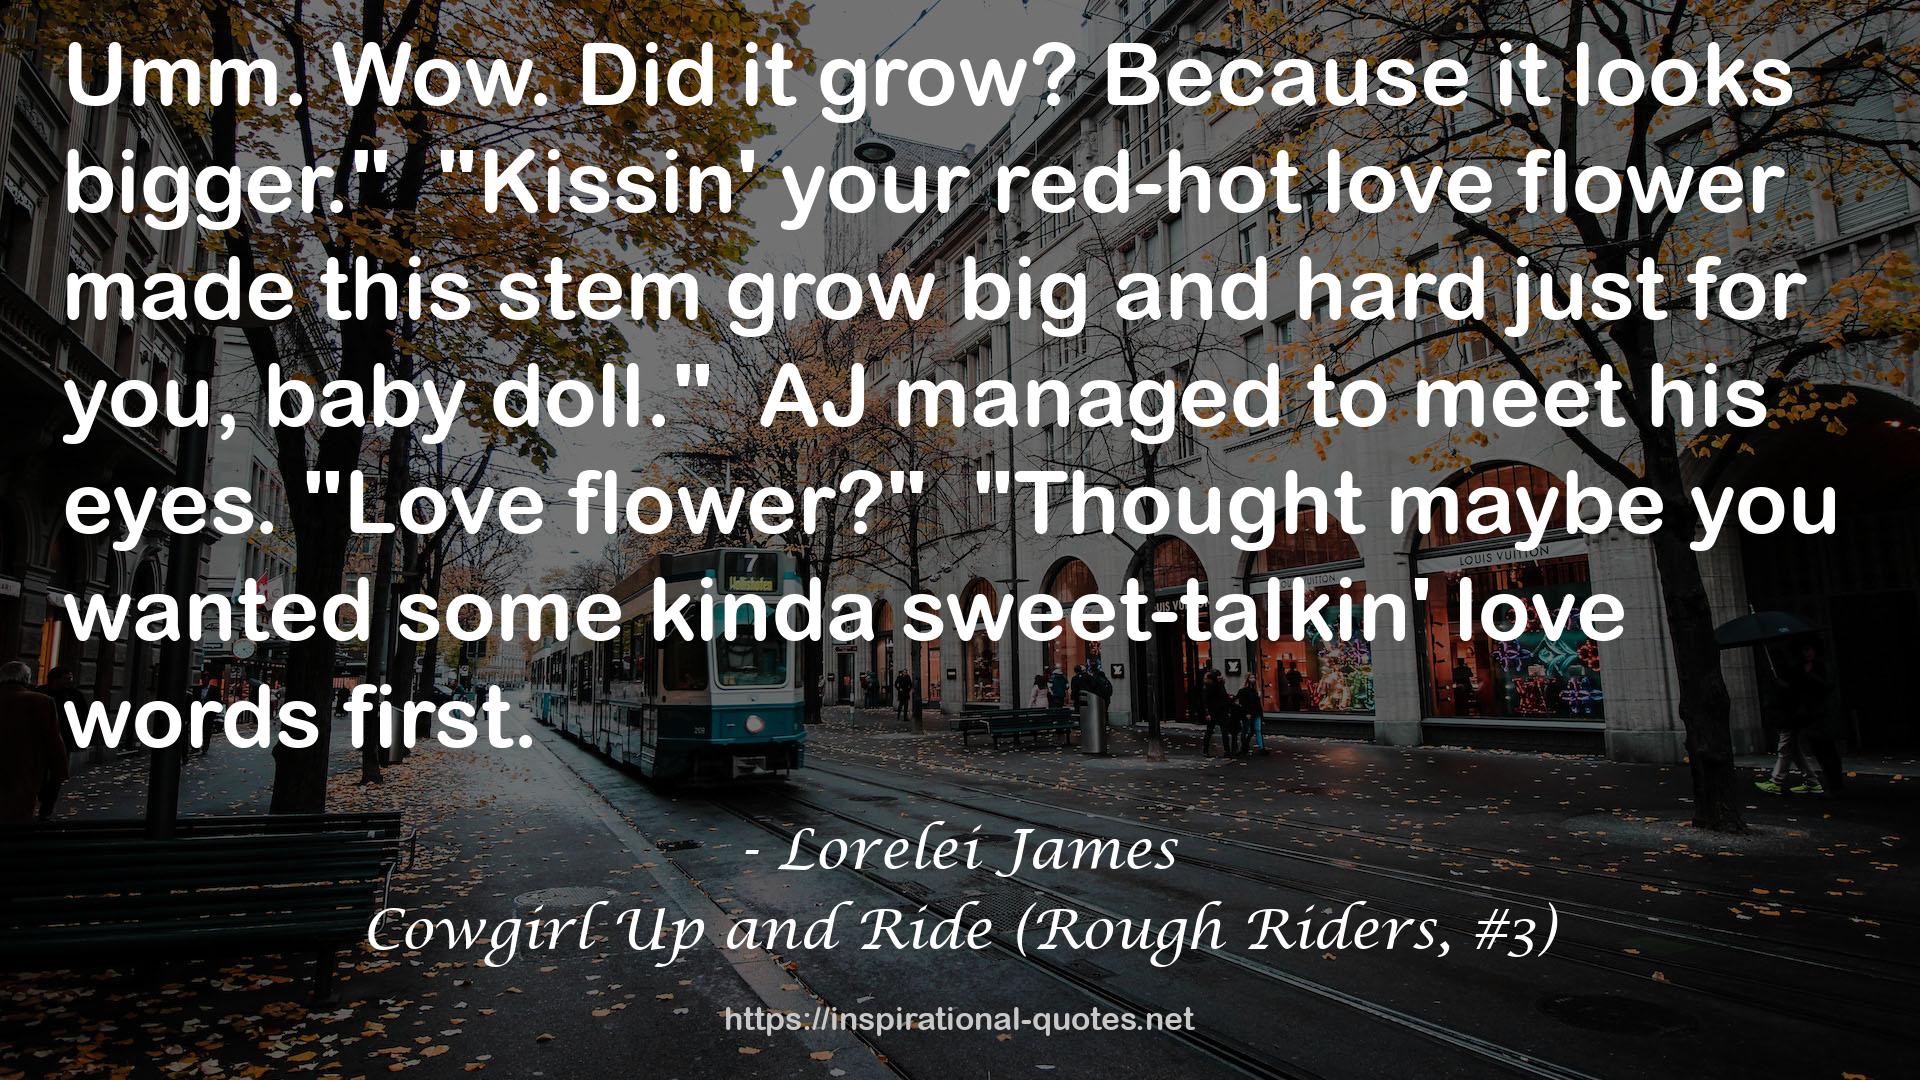 Cowgirl Up and Ride (Rough Riders, #3) QUOTES